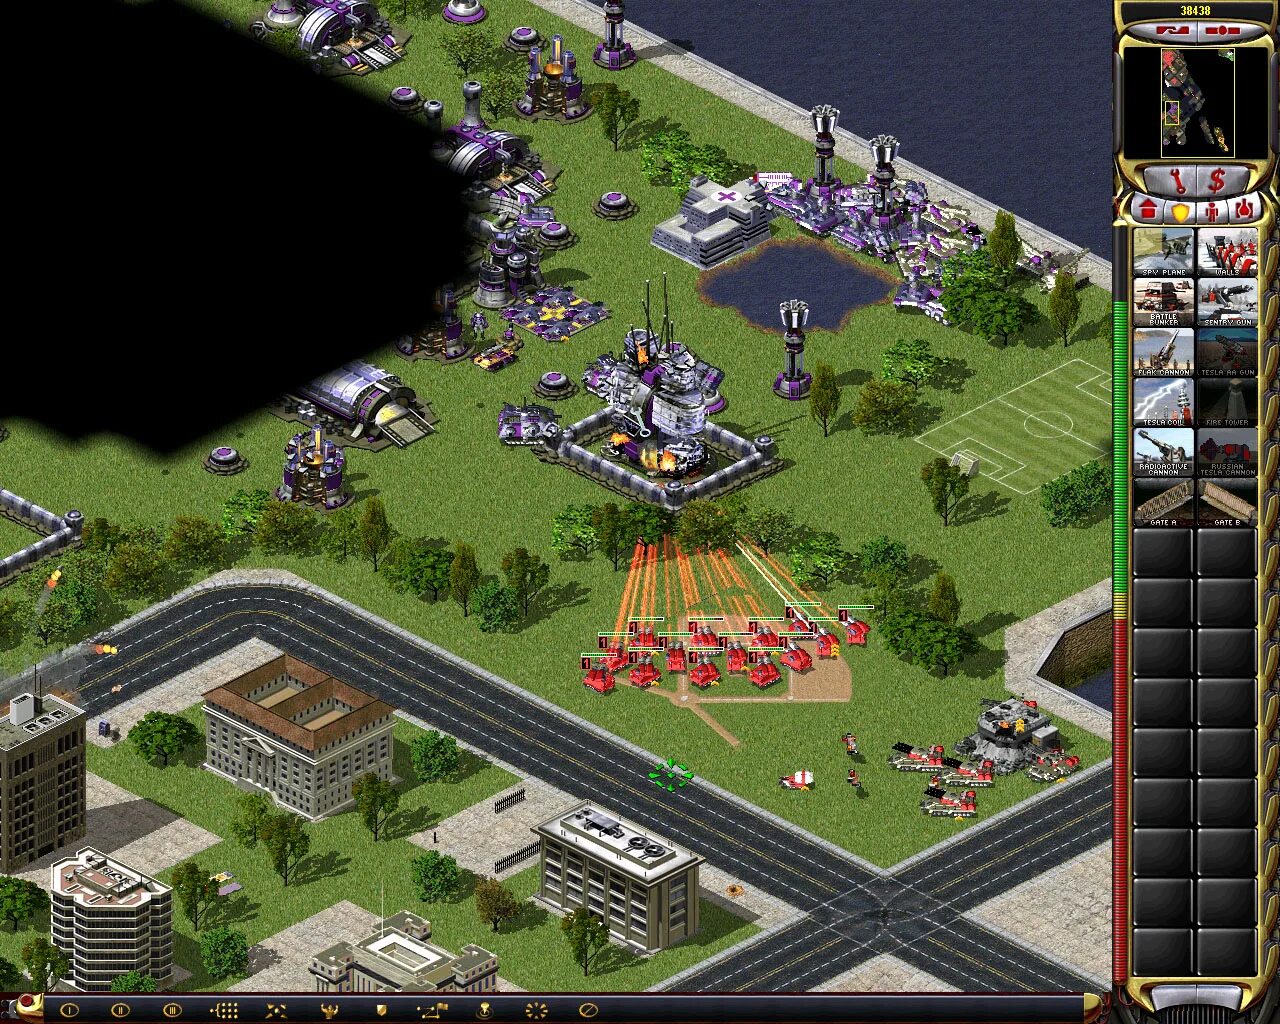 Red Alert 2. Command & Conquer: Red Alert 2. Command & Conquer: Red Alert 2 - Yuri's Revenge. Red Alert 2 Yuri's Revenge. Command conquer yuri